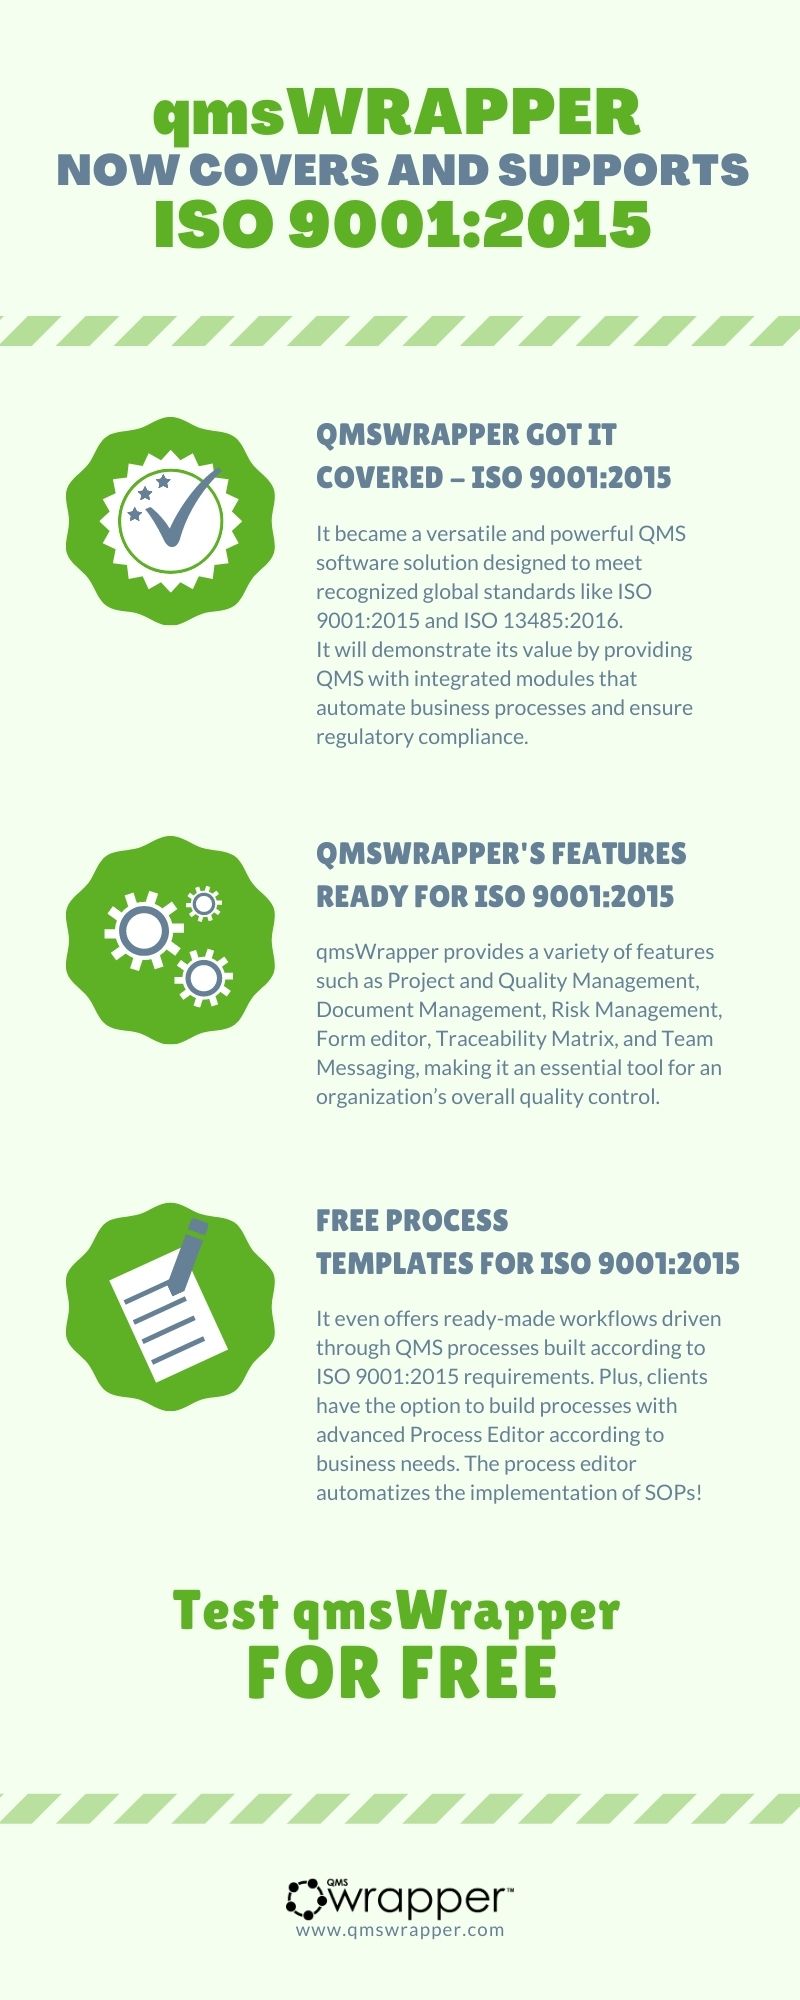 qmsWrapper supports ISO 9001:2015